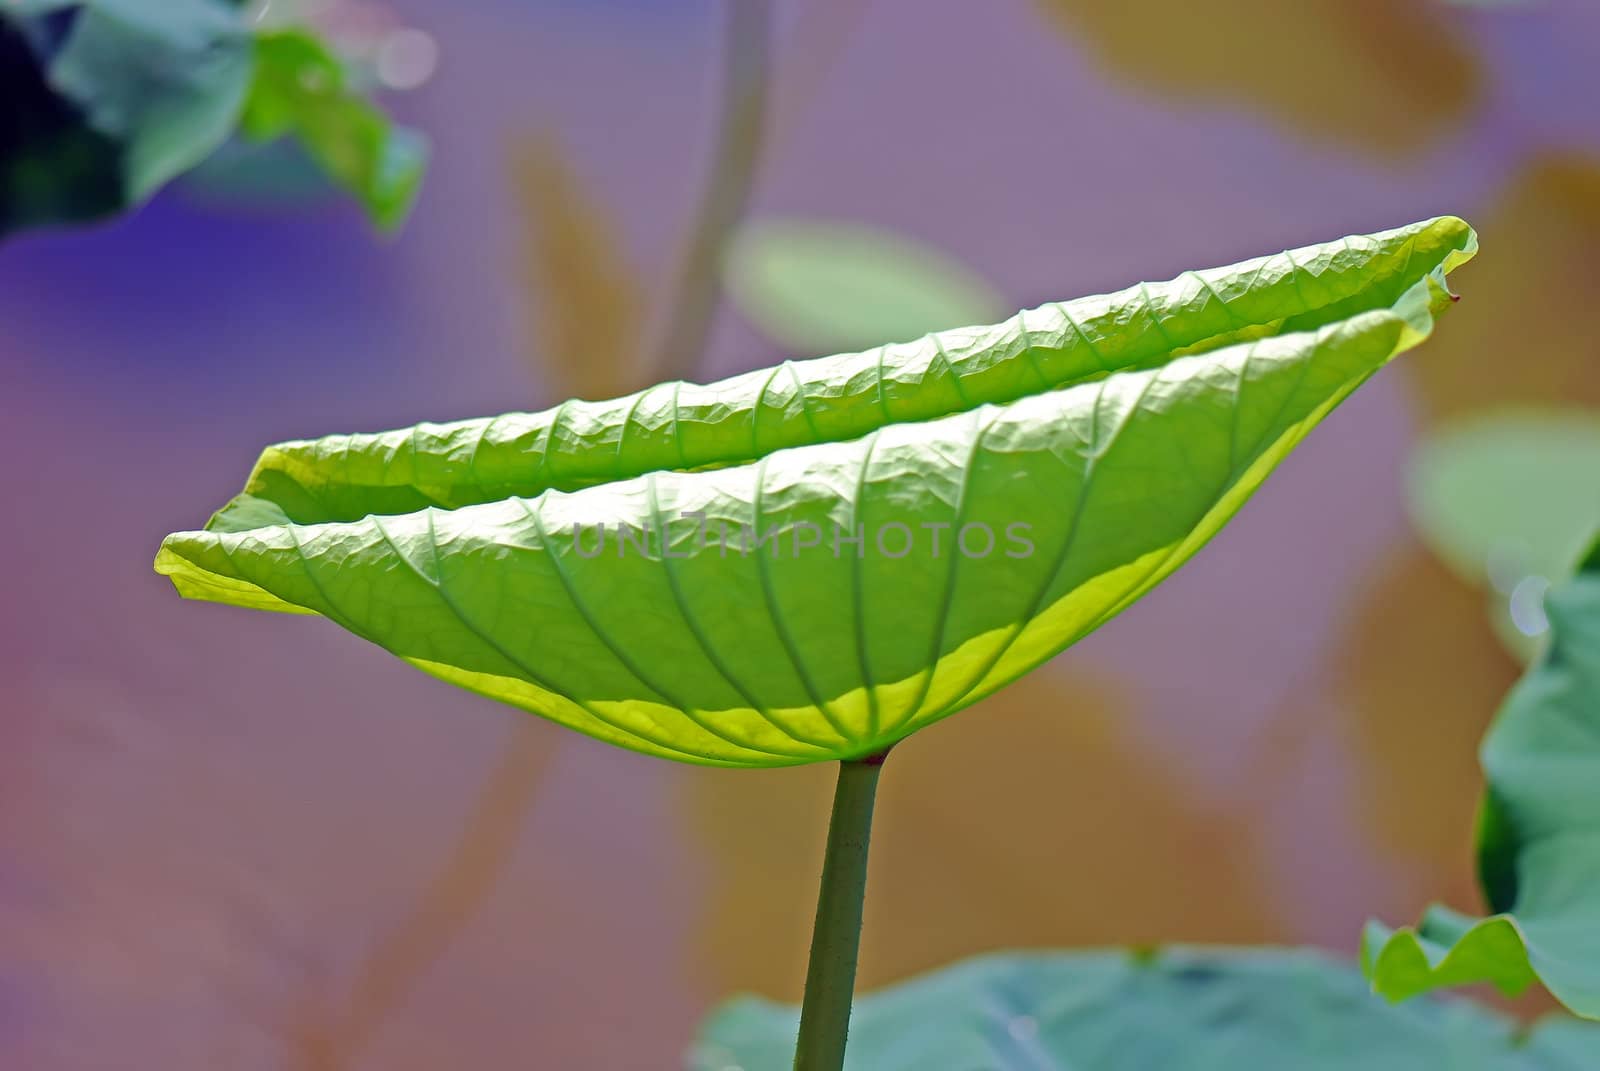 Lotus leaf isolated on a green background Photo taken on: June, 2008